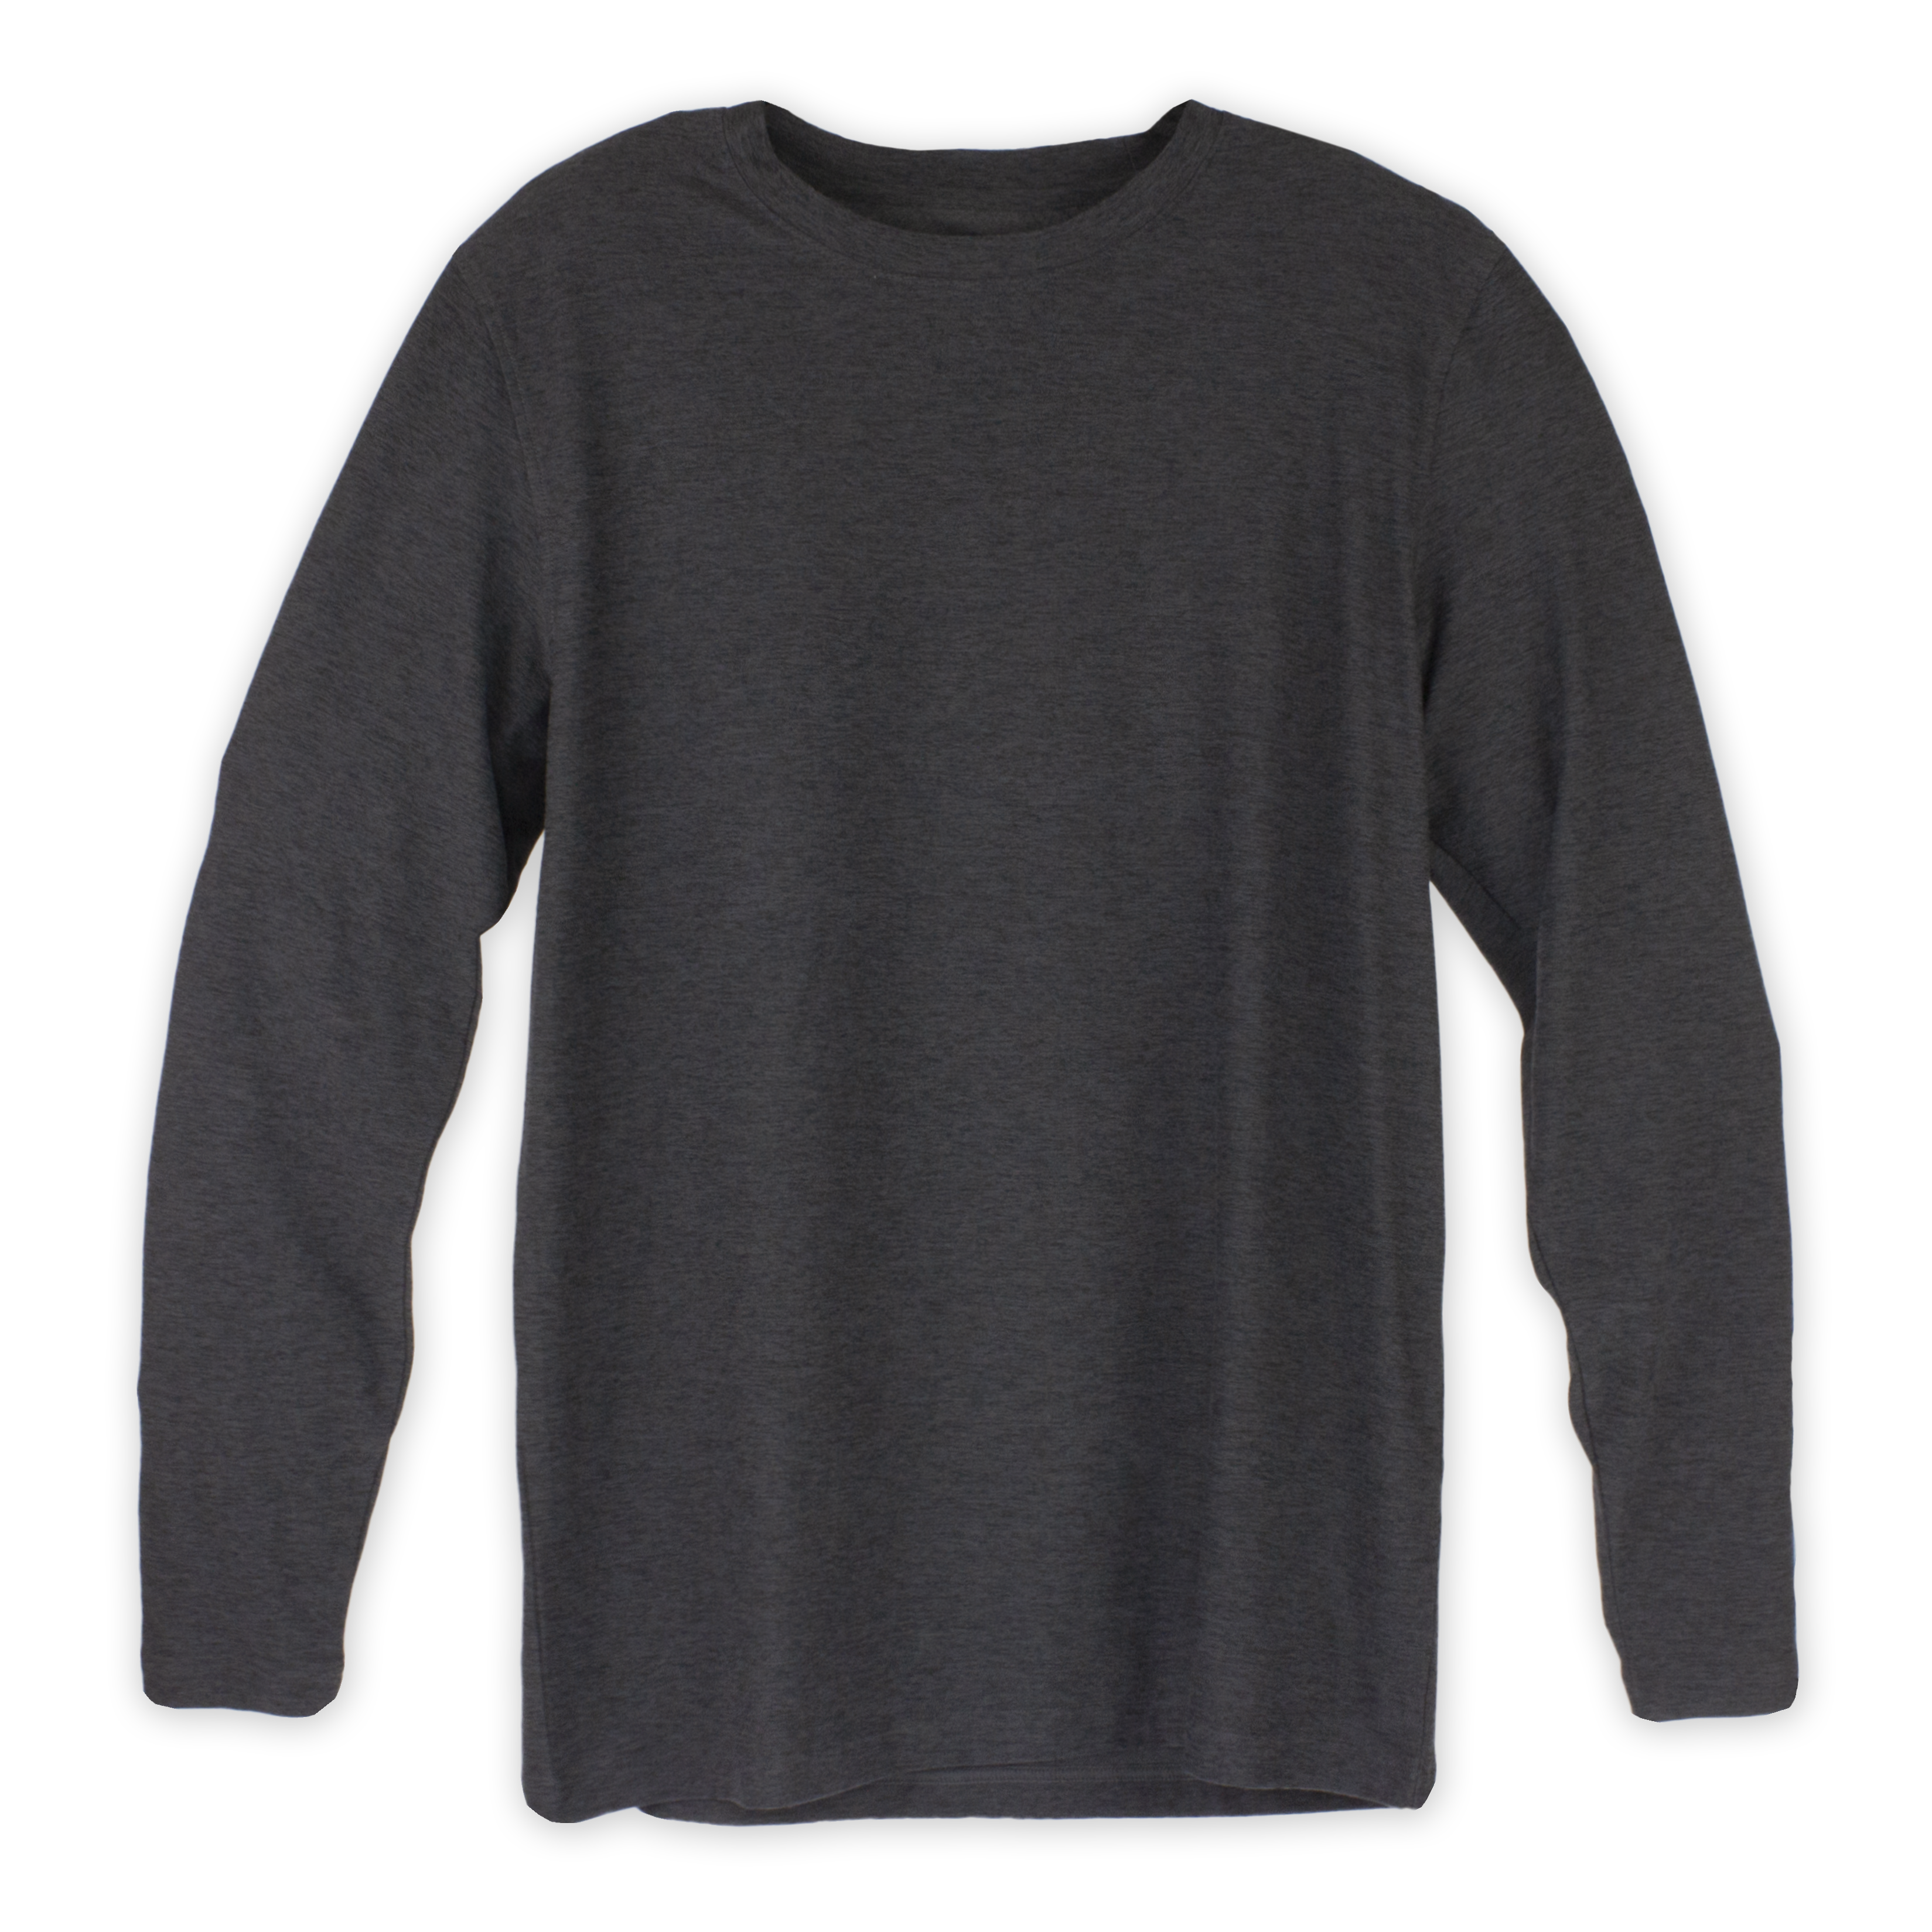 Long Sleeve Tech Tee Coal grey front with crewneck and heathered color